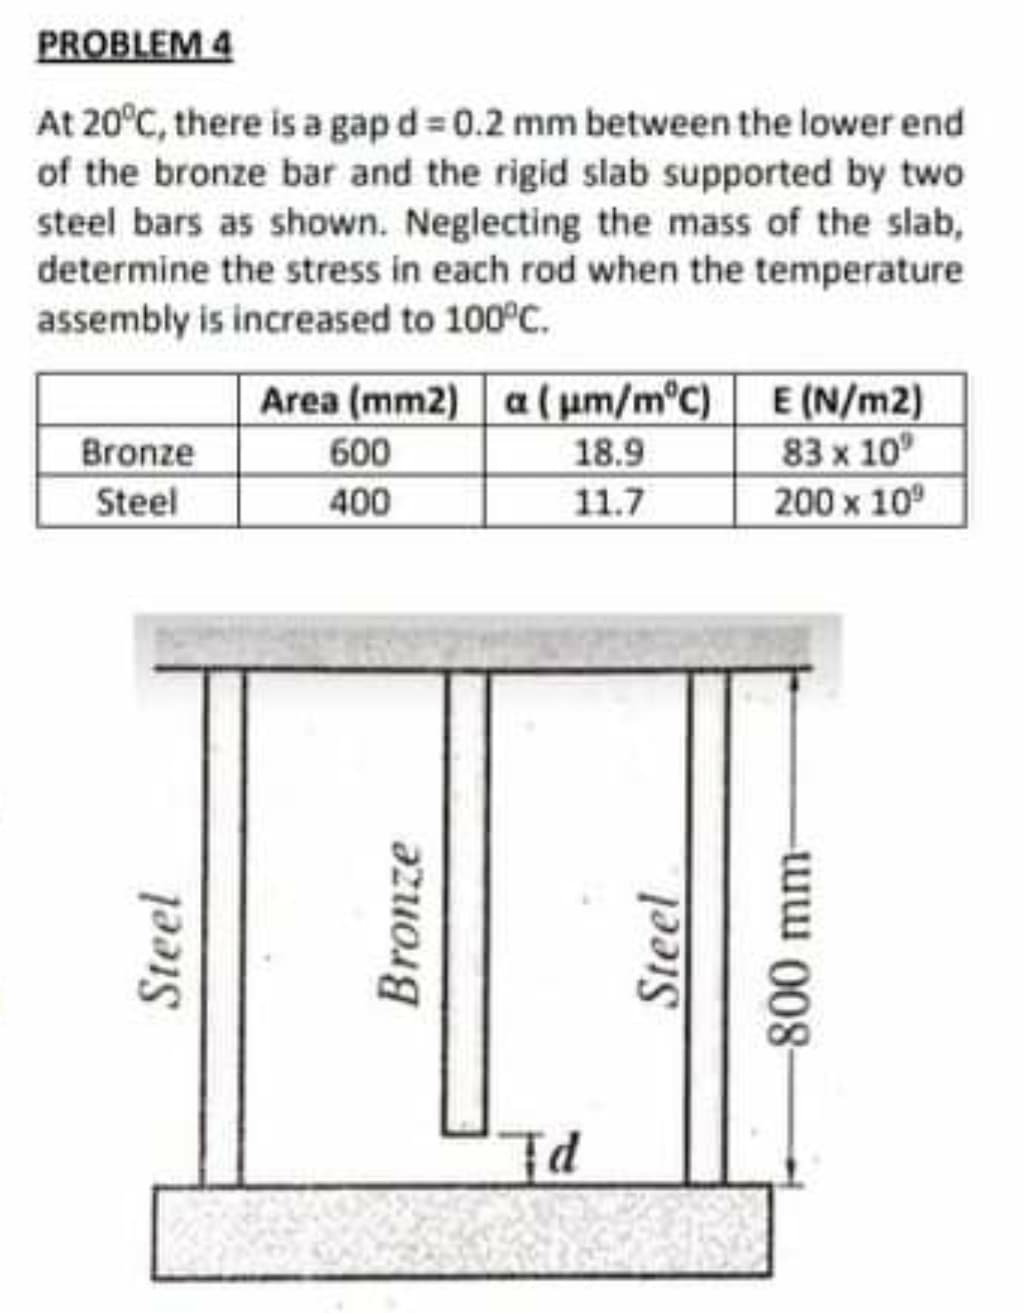 PROBLEM 4
At 20°C, there is a gap d = 0.2 mm between the lower end
of the bronze bar and the rigid slab supported by two
steel bars as shown. Neglecting the mass of the slab,
determine the stress in each rod when the temperature
assembly is increased to 100°C.
Area (mm2) a( um/m°C) E (N/m2)
83 x 10
200 x 10
Bronze
600
18.9
Steel
400
11.7
Steel
Bronze
Steel
